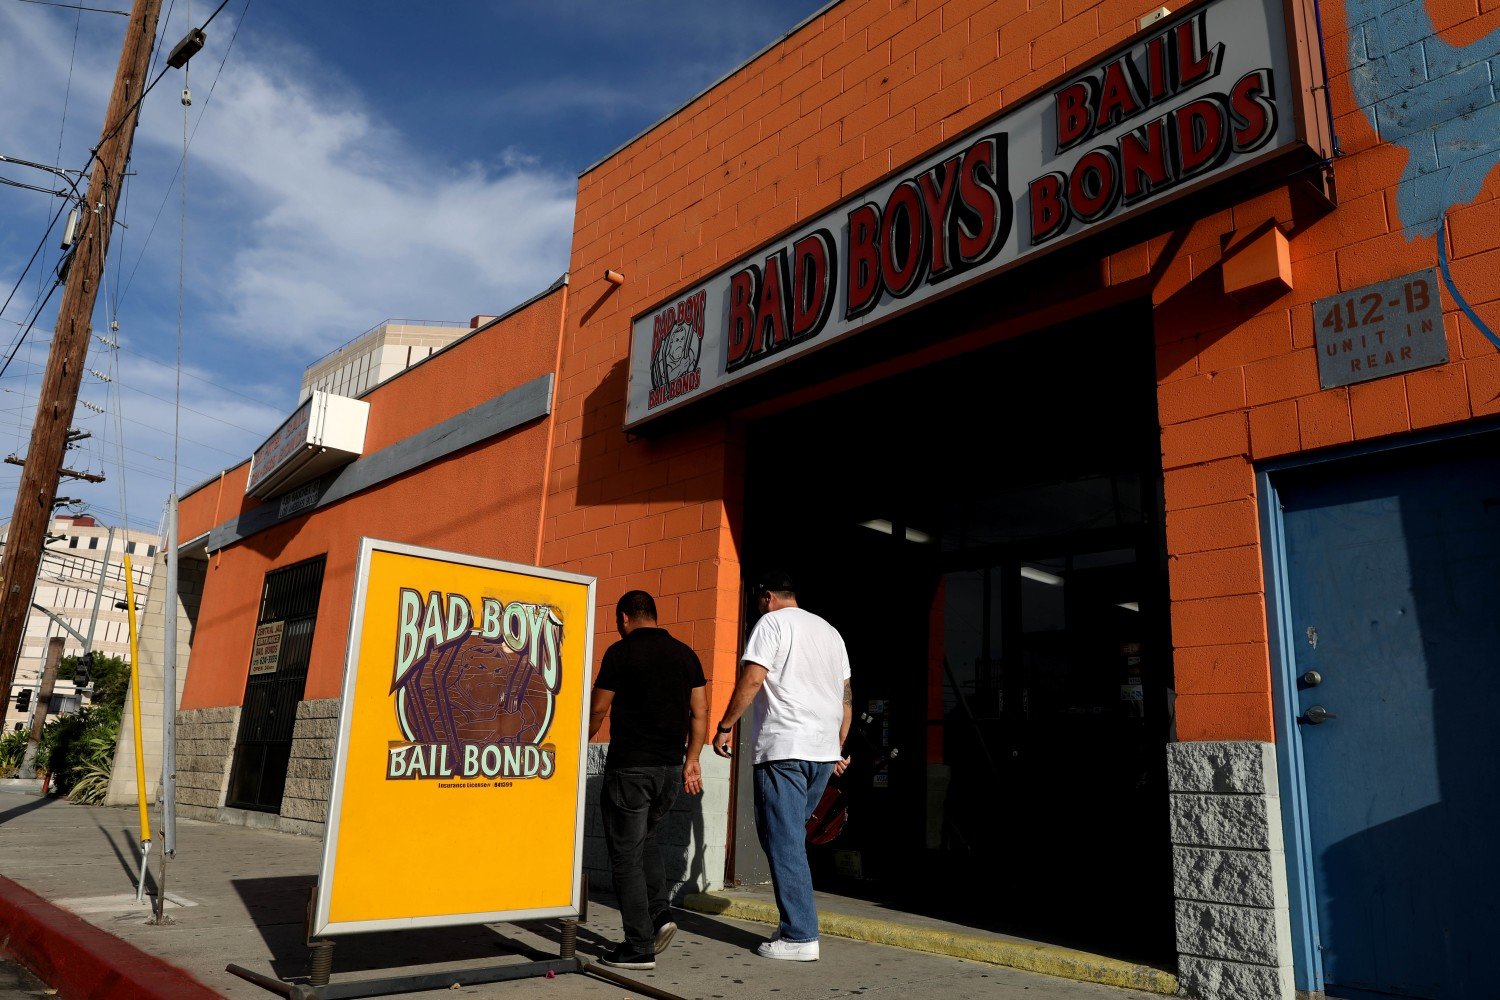 Bad Boys Bail Bonds is located across the street from the Los Angeles County Jail in Los Angeles, Calif., on Aug. 30, 2018. Gov. Jerry Brown signed Senate Bill 10, replacing bail with "risk assessments" of individuals and non-monetary conditions of release. The change, which will take effect in October 2019. (Gary Coronado/Los Angeles Times/TNS)